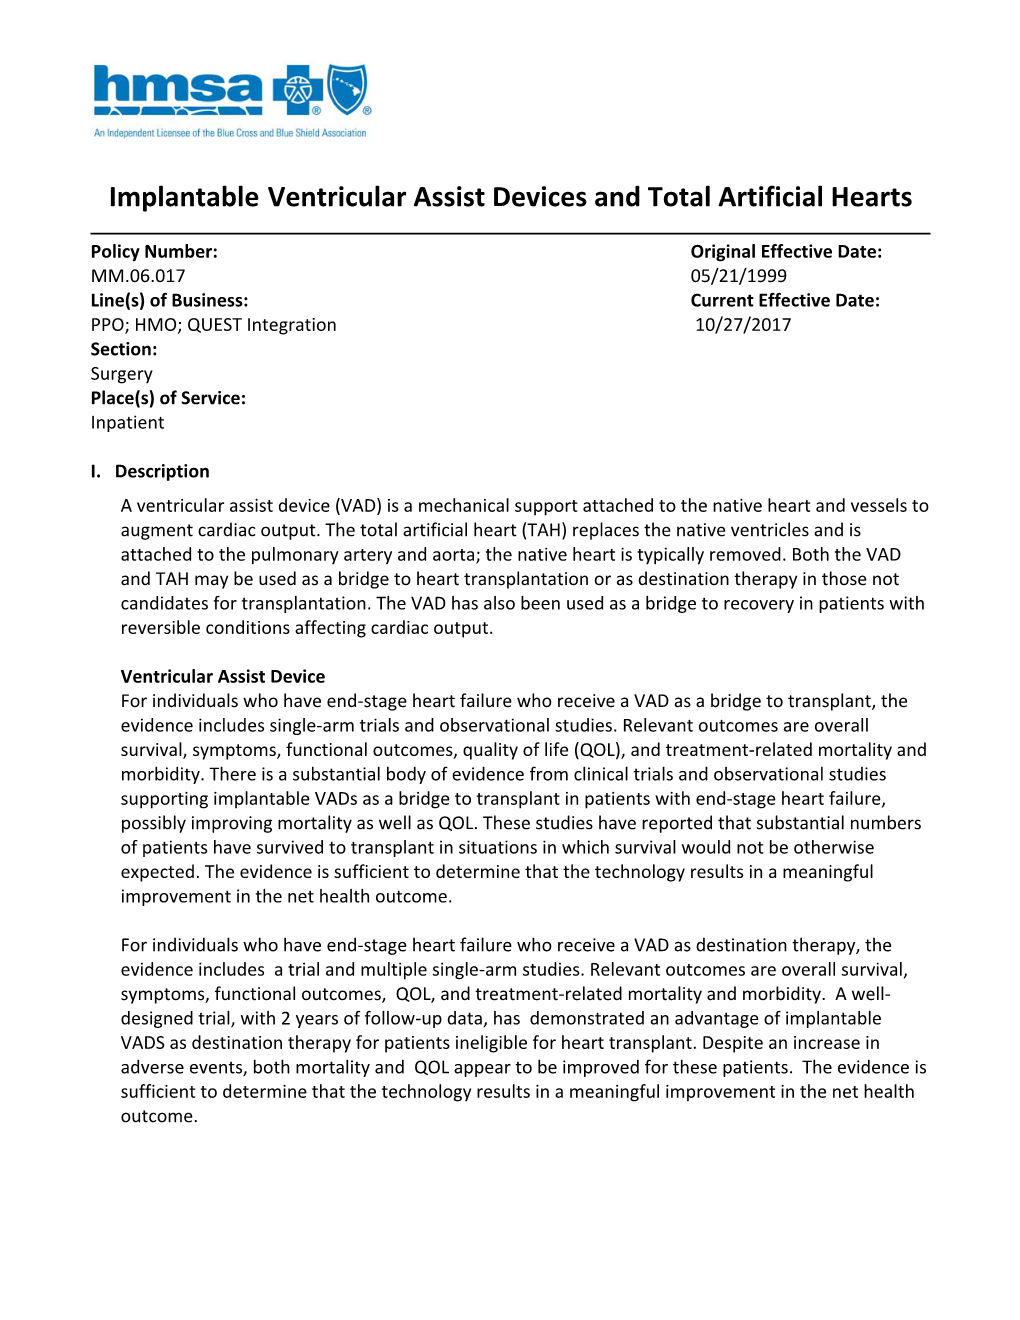 Implantable Ventricular Assist Devices and Total Artificial Hearts